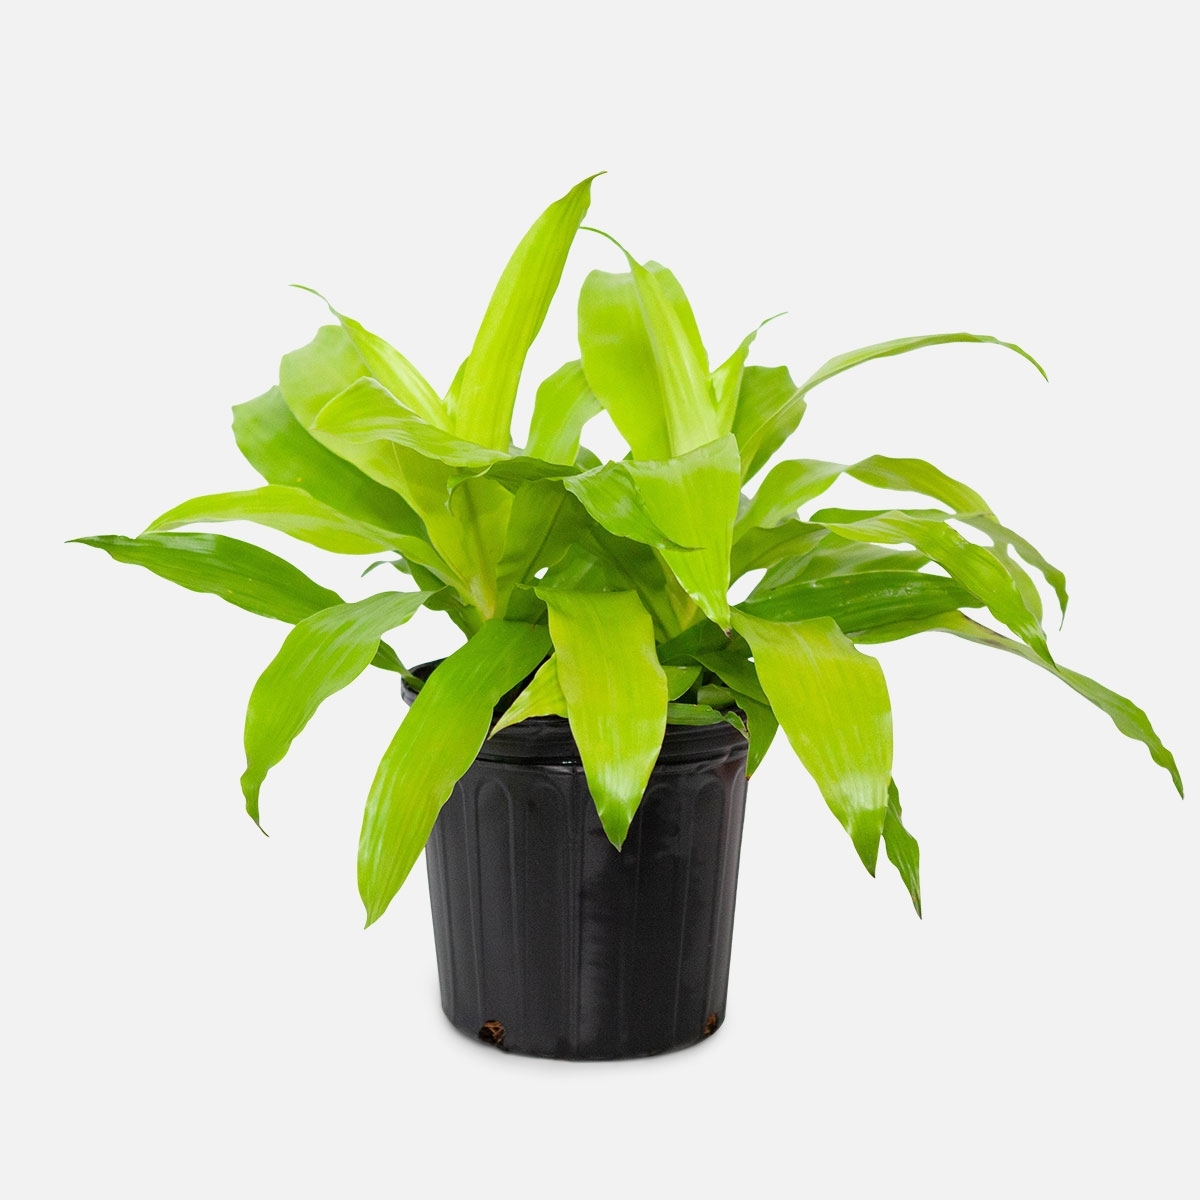 Dracaena plant with lime colored leaves